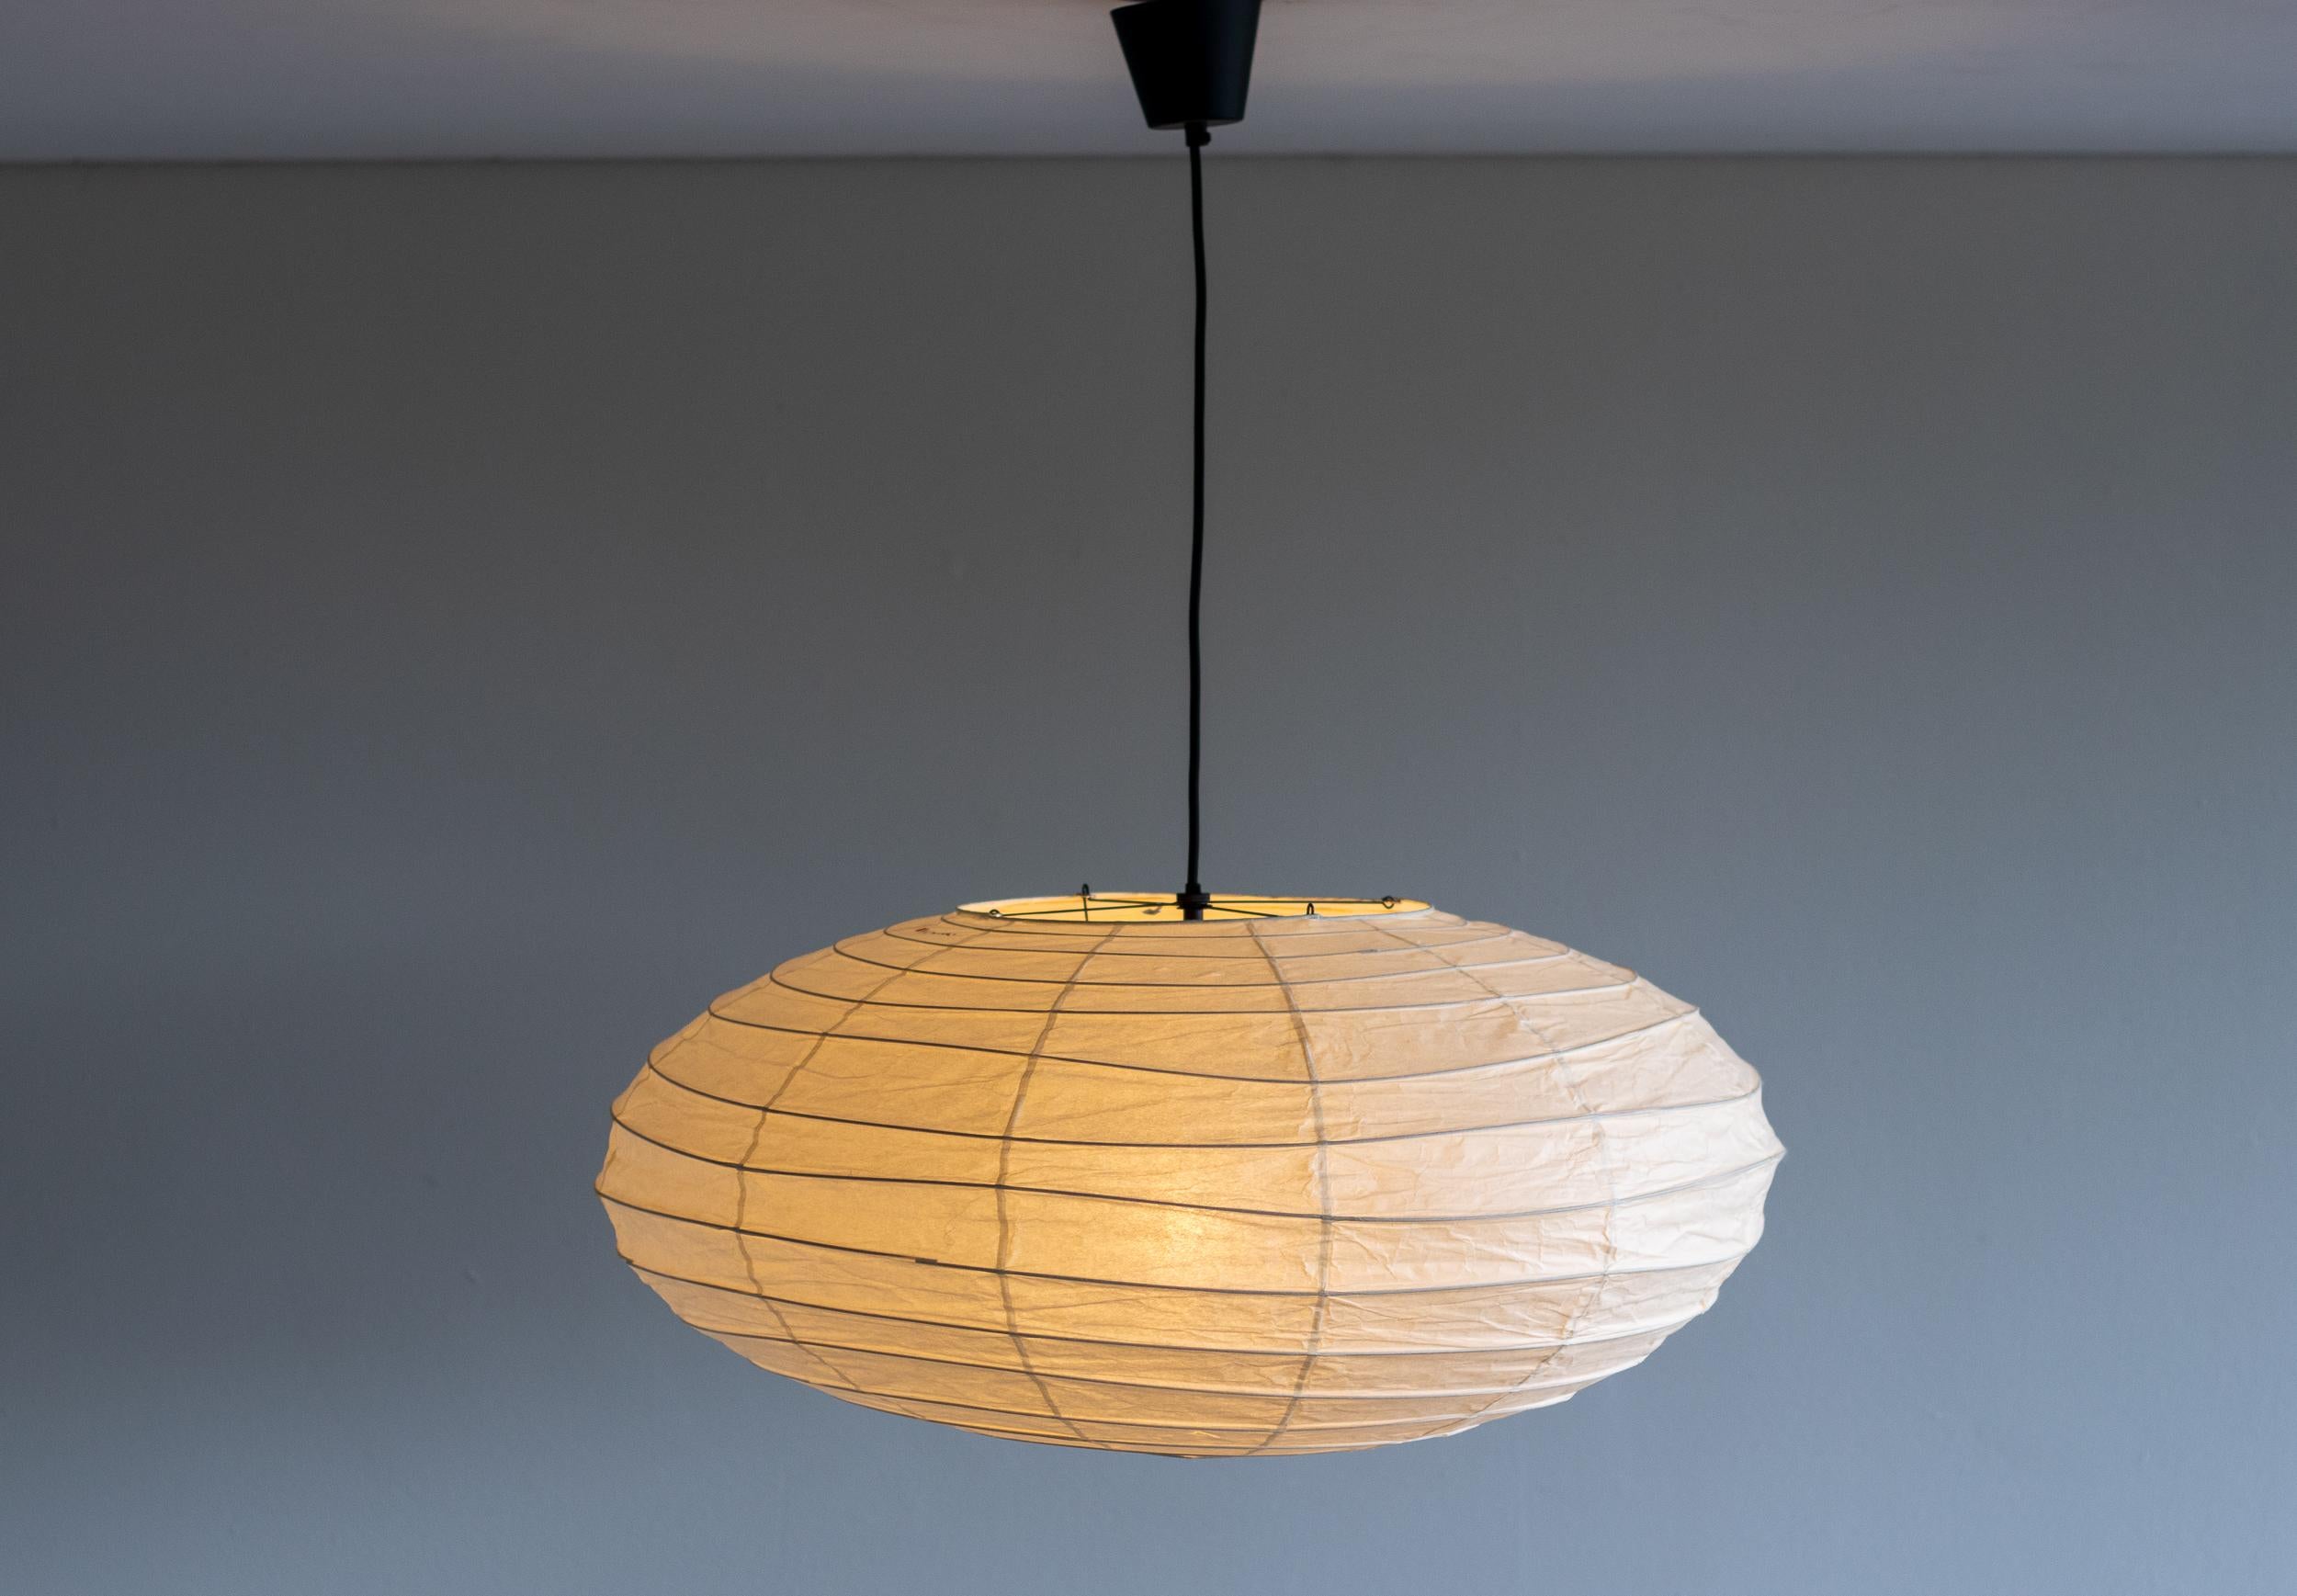 Akari 70EN lamp designed by Isamu Noguchi, 1951. Manufactured by Ozeki & Co. in Japan. 
Bambu structure covered by washi paper. Rewired for U.S. standards. 
New cord and canopy from Noguchi Museum. 
This fixture has one socket. We recommend one E27